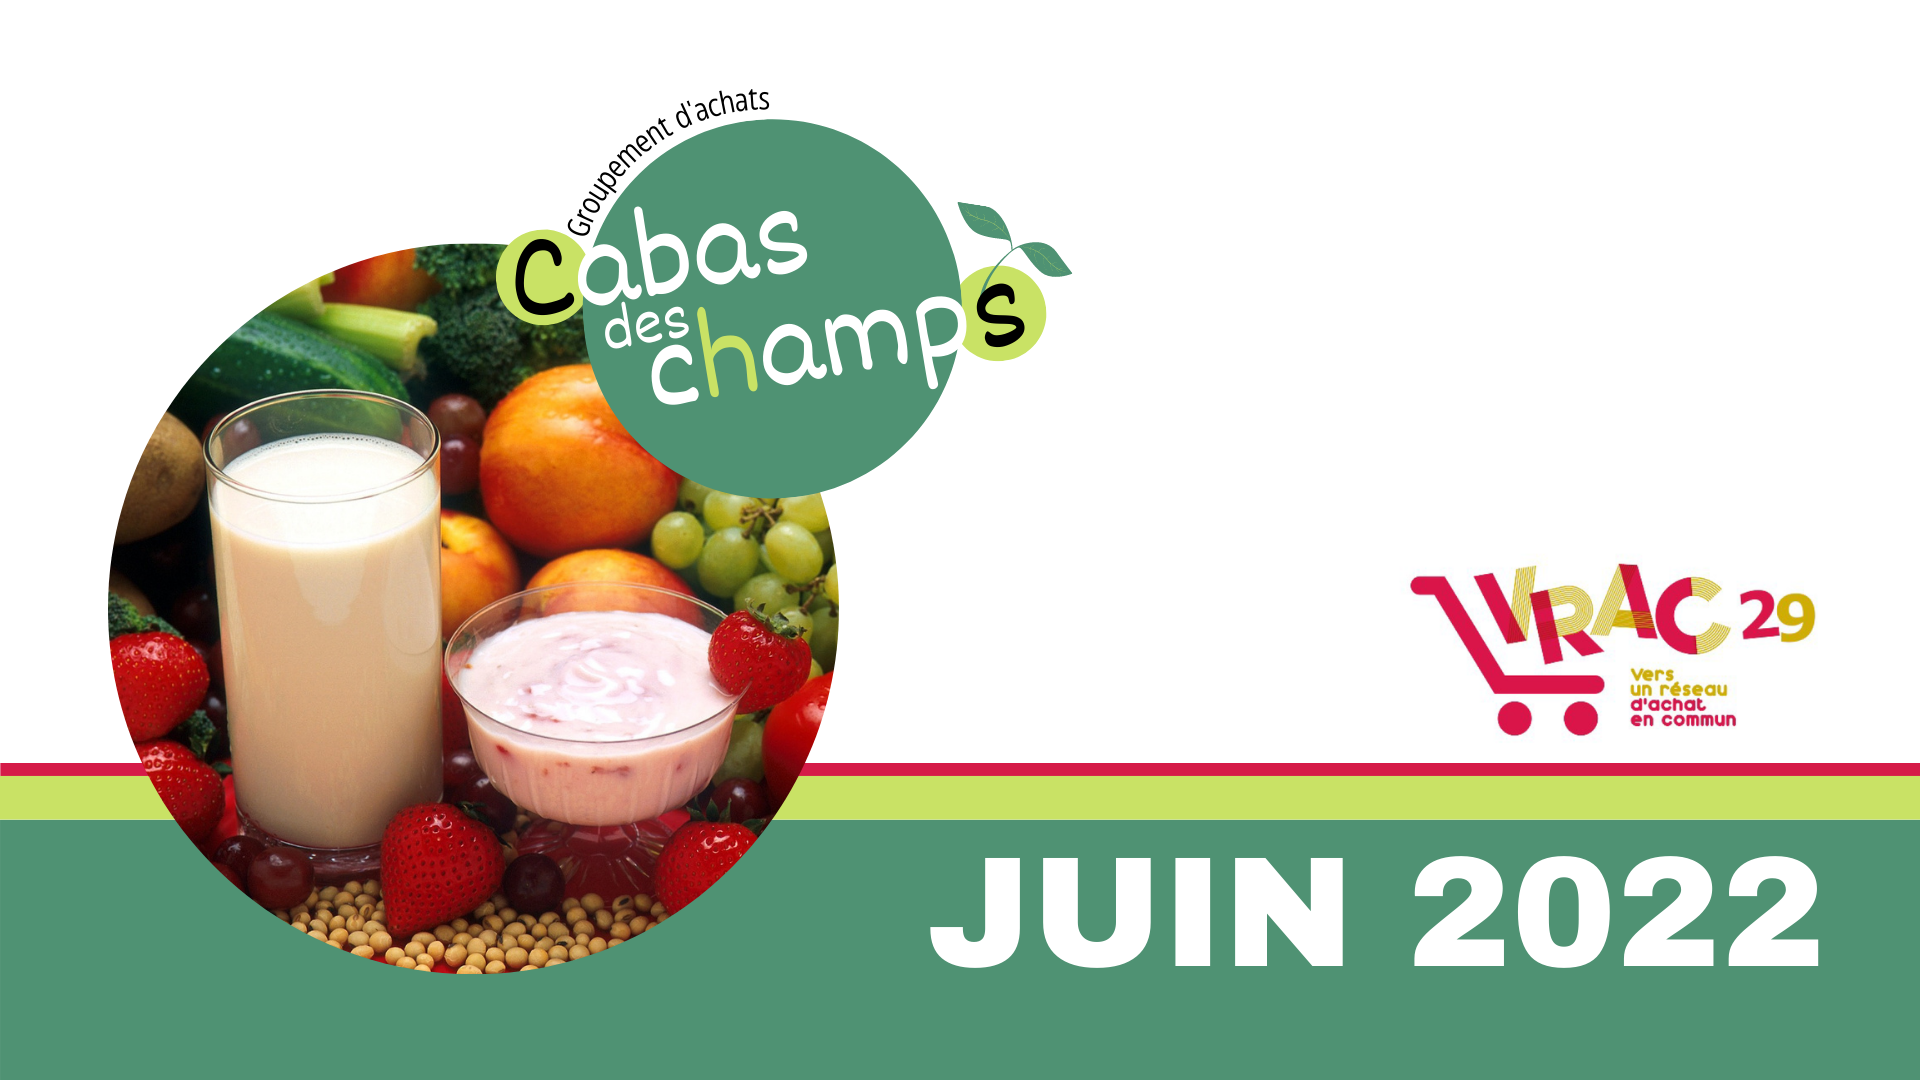 You are currently viewing Cabas des champs et Vrac 29 – Juin 2022